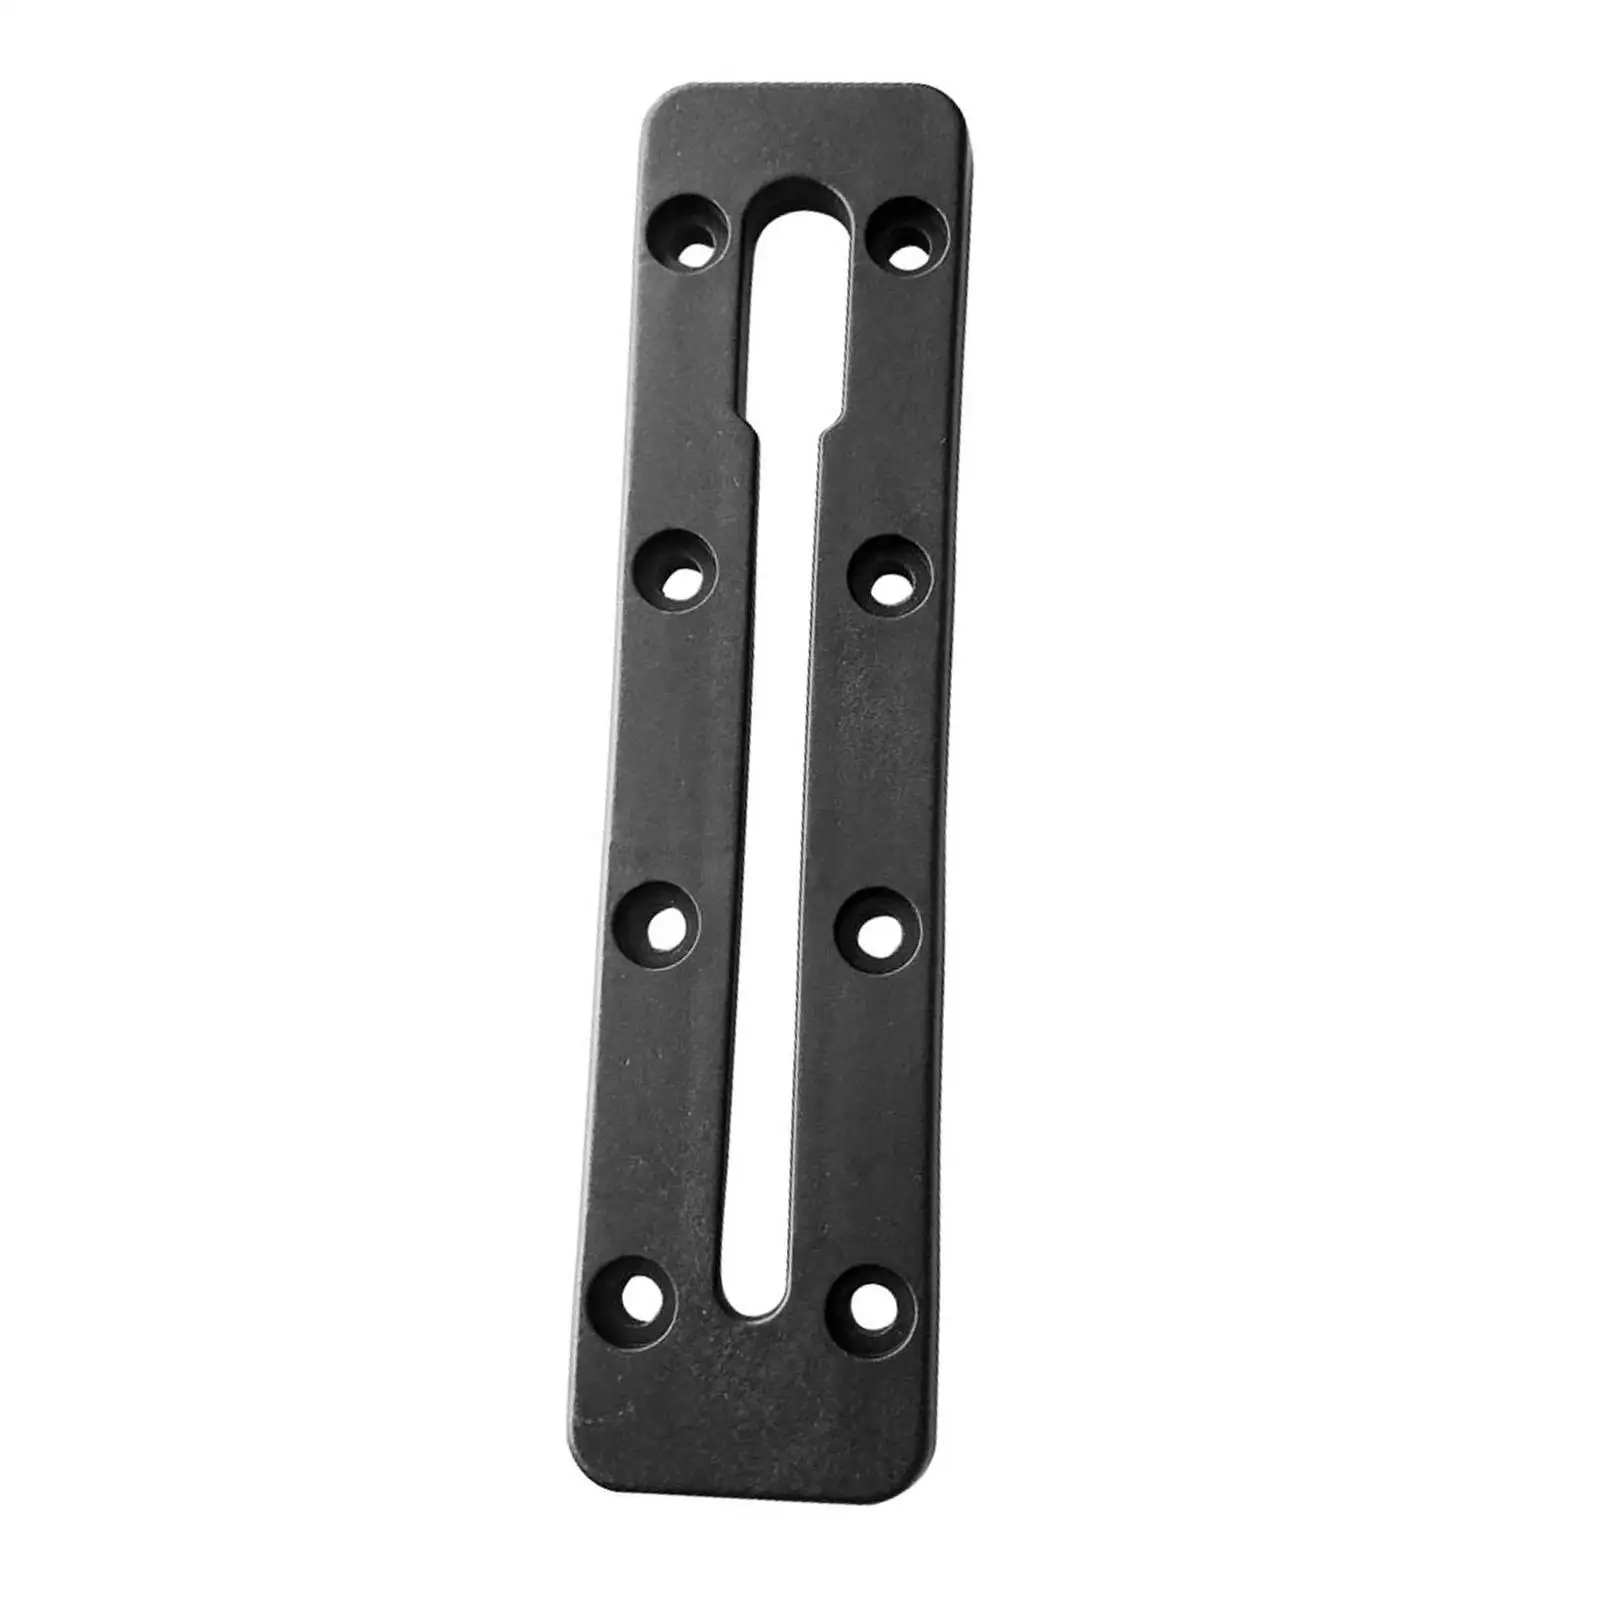 Kayak Slide Track Replacements Easy to Install Fishing Rod Holder Accessory for Fishing